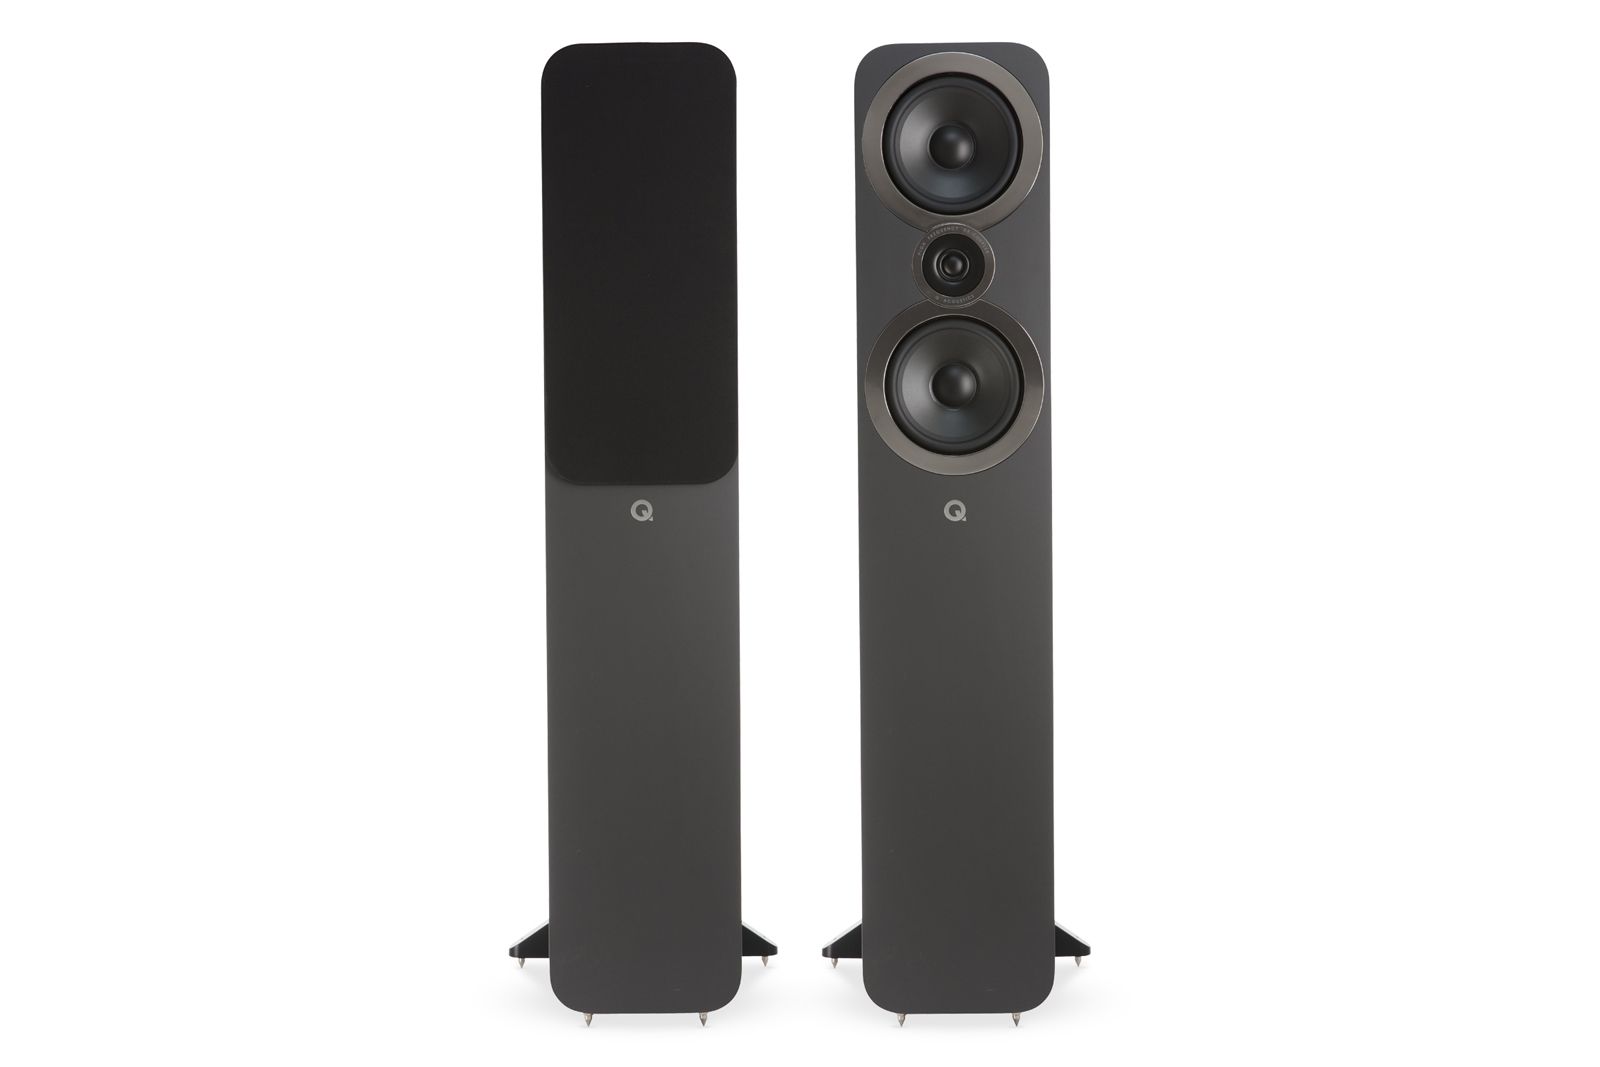 Q Acoustics intros revamped 3000i Series speakers from £199 image 2